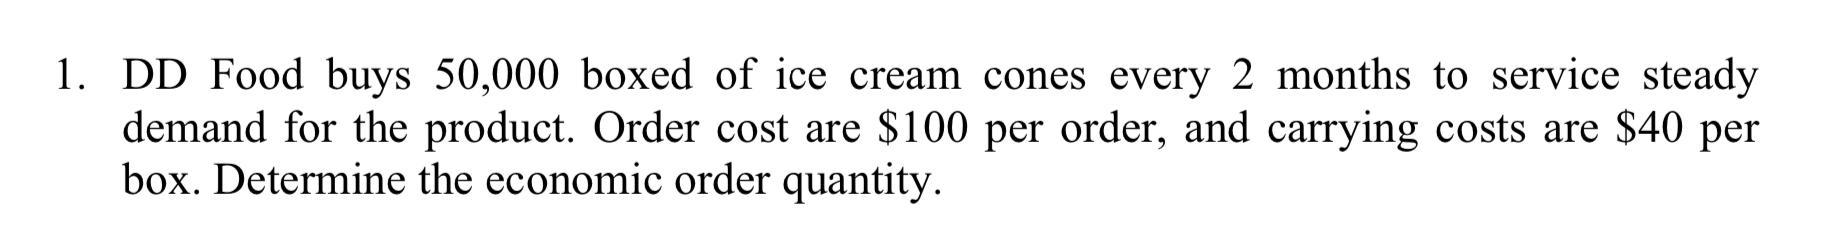 1. DD Food buys 50,000 boxed of ice cream cones every 2 months to service steady demand for the product. Order cost are $100